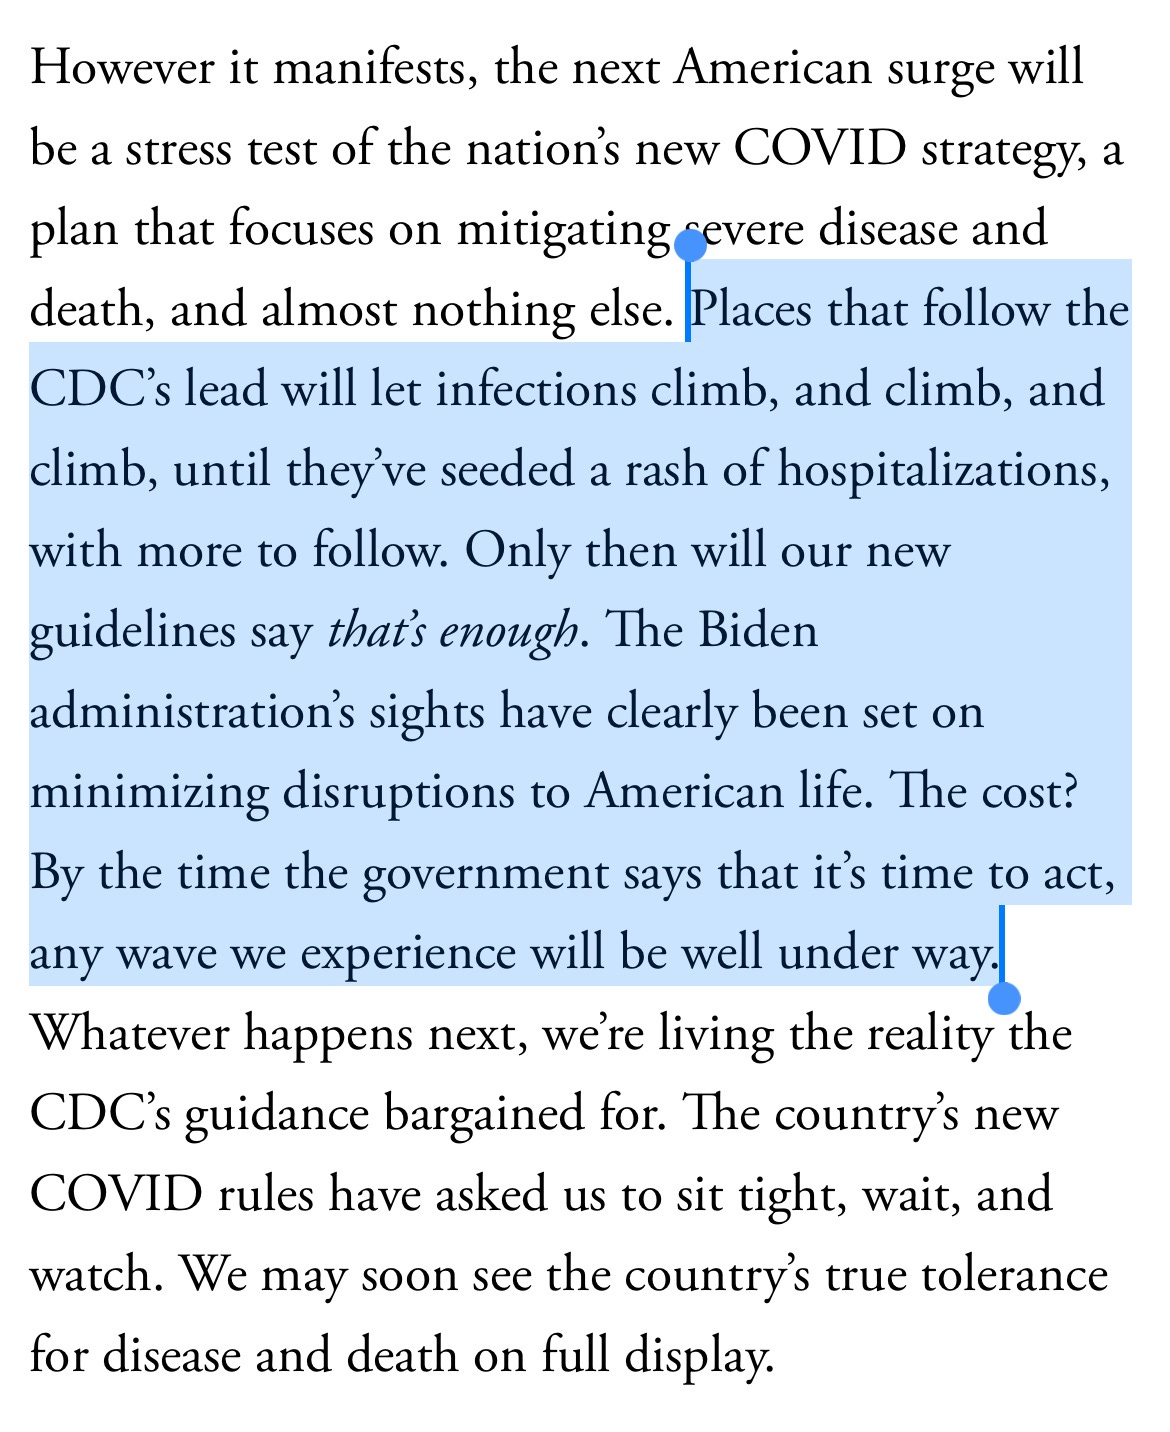 However it manifests, the next American surge will be a stress test of the nation’s new COVID strategy, a plan that focuses on mitigating severe disease and death, and almost nothing else. Places that follow the CDC’s lead will let infections climb, and climb, and climb, until they’ve seeded a rash of hospitalizations, with more to follow. Only then will our new guidelines say that’s enough. The Biden administration’s sights have clearly been set on minimizing disruptions to American life. The cost? By the time the government says that it’s time to act, any wave we experience will be well under way. Whatever happens next, we’re living the reality the CDC’s guidance bargained for. The country’s new COVID rules have asked us to sit tight, wait, and watch. We may soon see the country’s true tolerance for disease and death on full display.